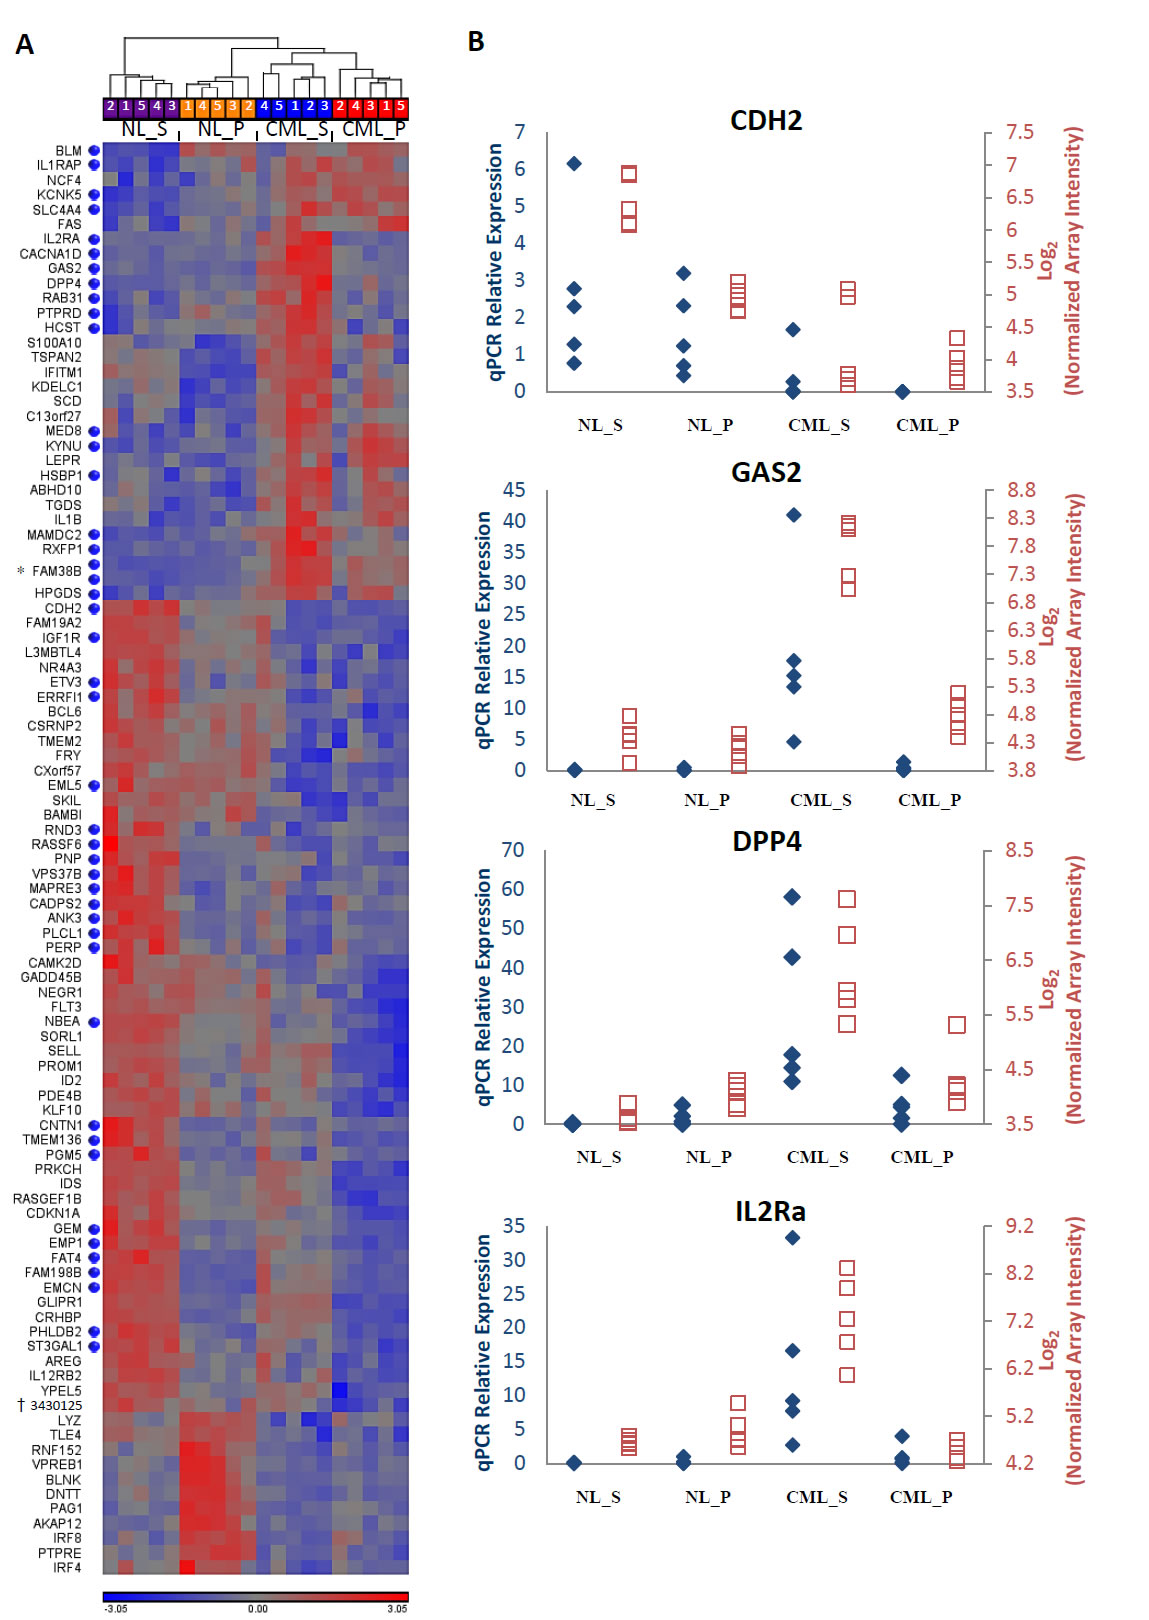 Differentially expressed genes between CML and normal stem and progenitor cells.